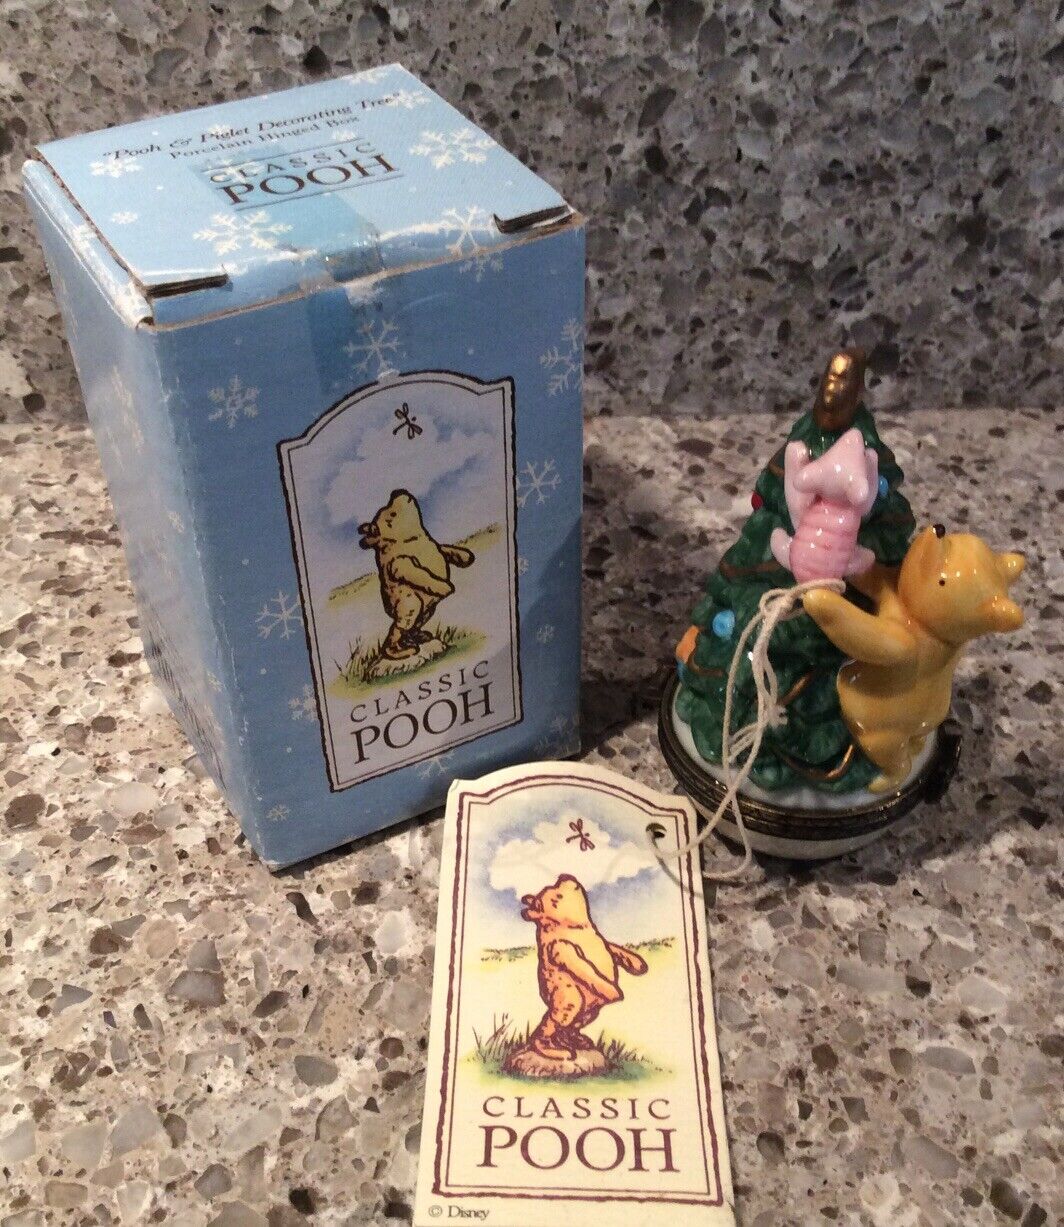 Midwest of Cannon Falls - Pooh & Piglet Decorating Tree Porcelain Hinged Box